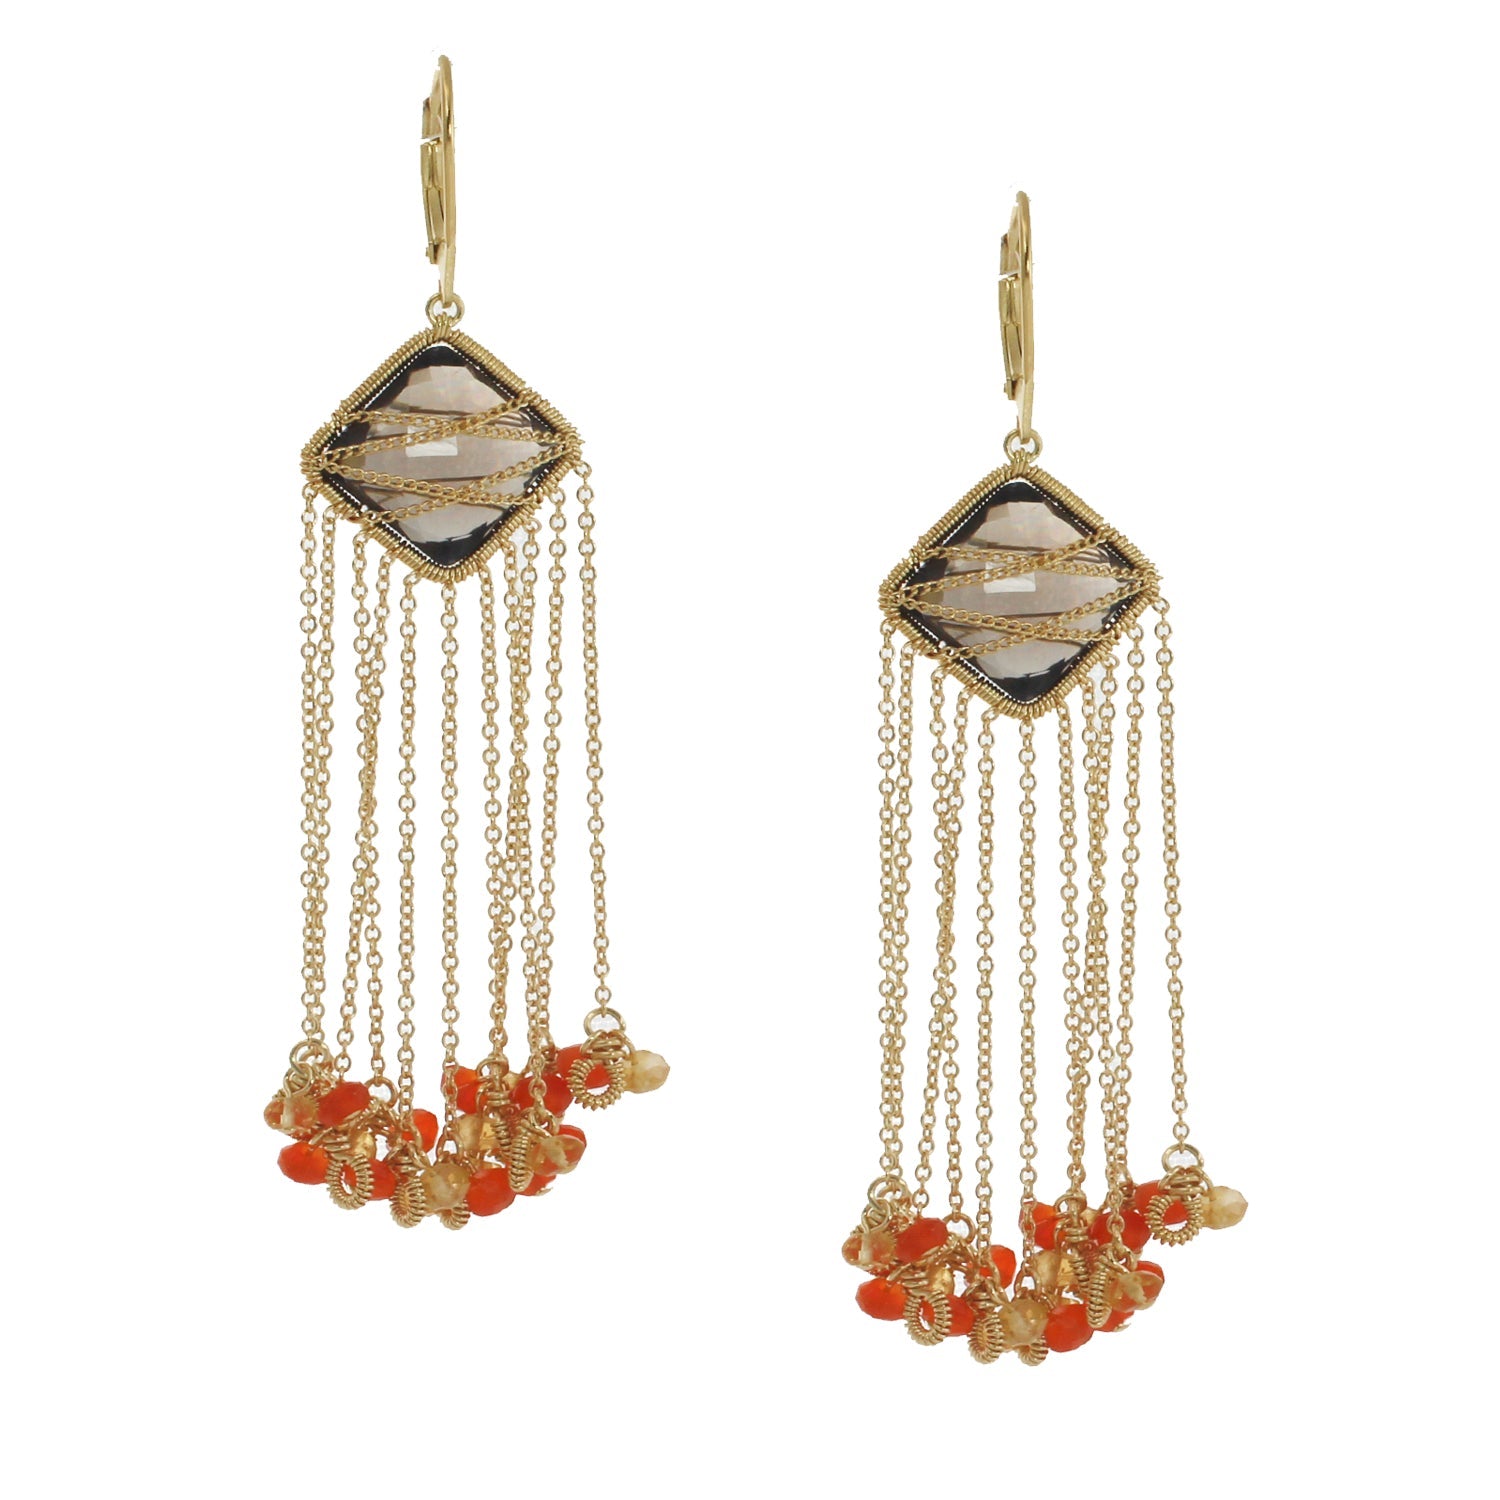 Kristen Amato Rose Gold over Silver Smoky Quartz and Tourmaline Earrings